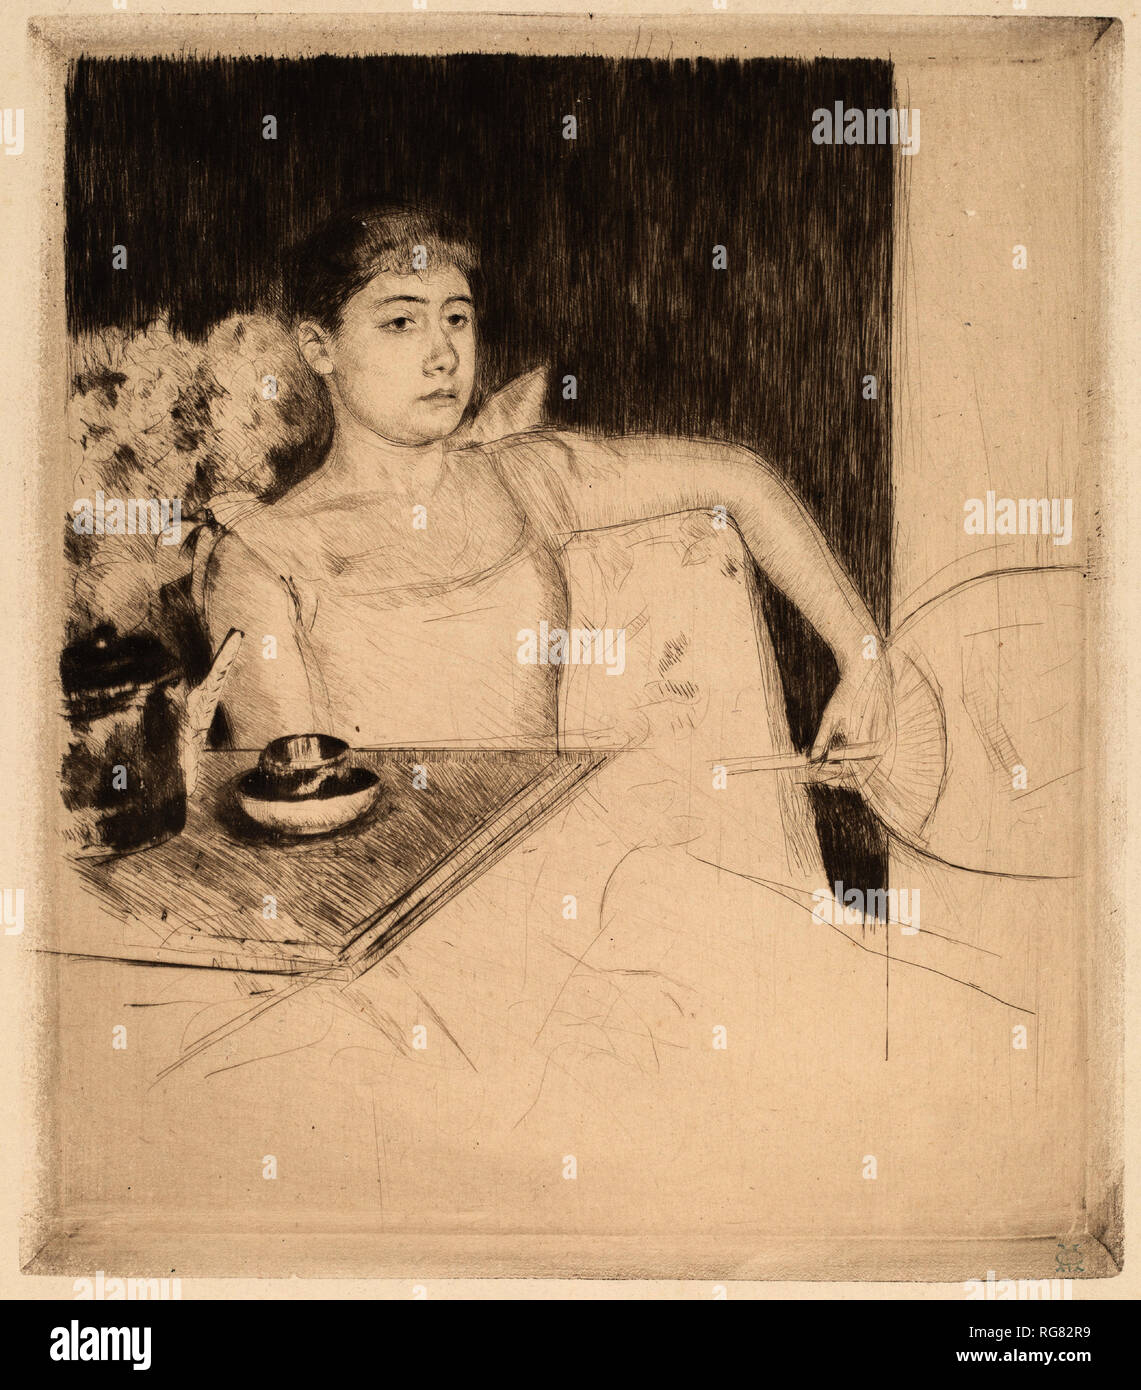 Tea. Dated: c. 1890. Dimensions: plate: 17.7 x 15.5 cm (6 15/16 x 6 1/8 in.)  sheet: 30.5 × 23.8 cm (12 × 9 3/8 in.). Medium: drypoint in black. Museum: National Gallery of Art, Washington DC. Author: Mary Cassatt. Stock Photo